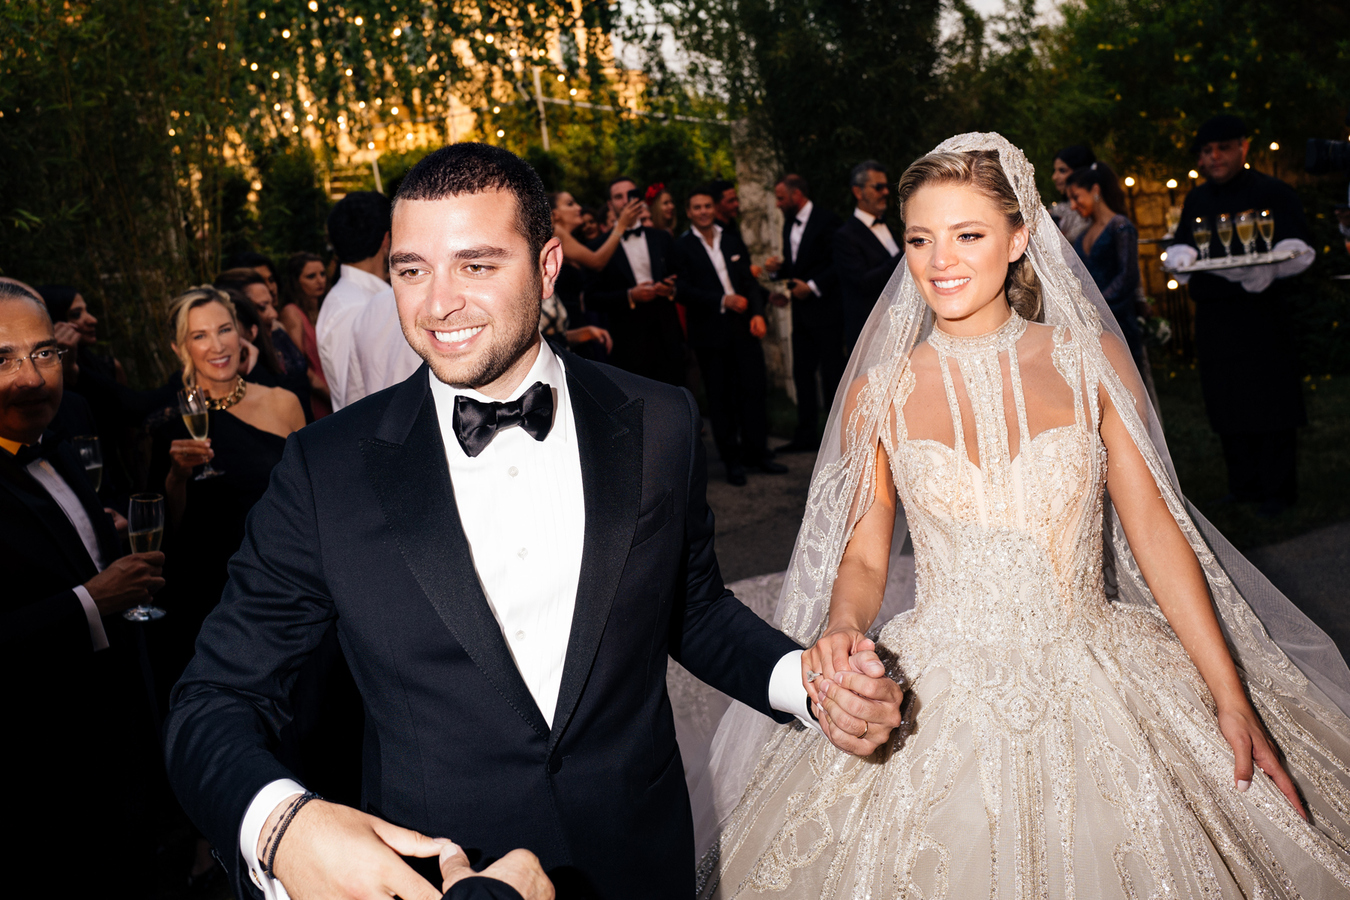 Christina Mourad's Elie Saab Wedding Gown From Every Angle